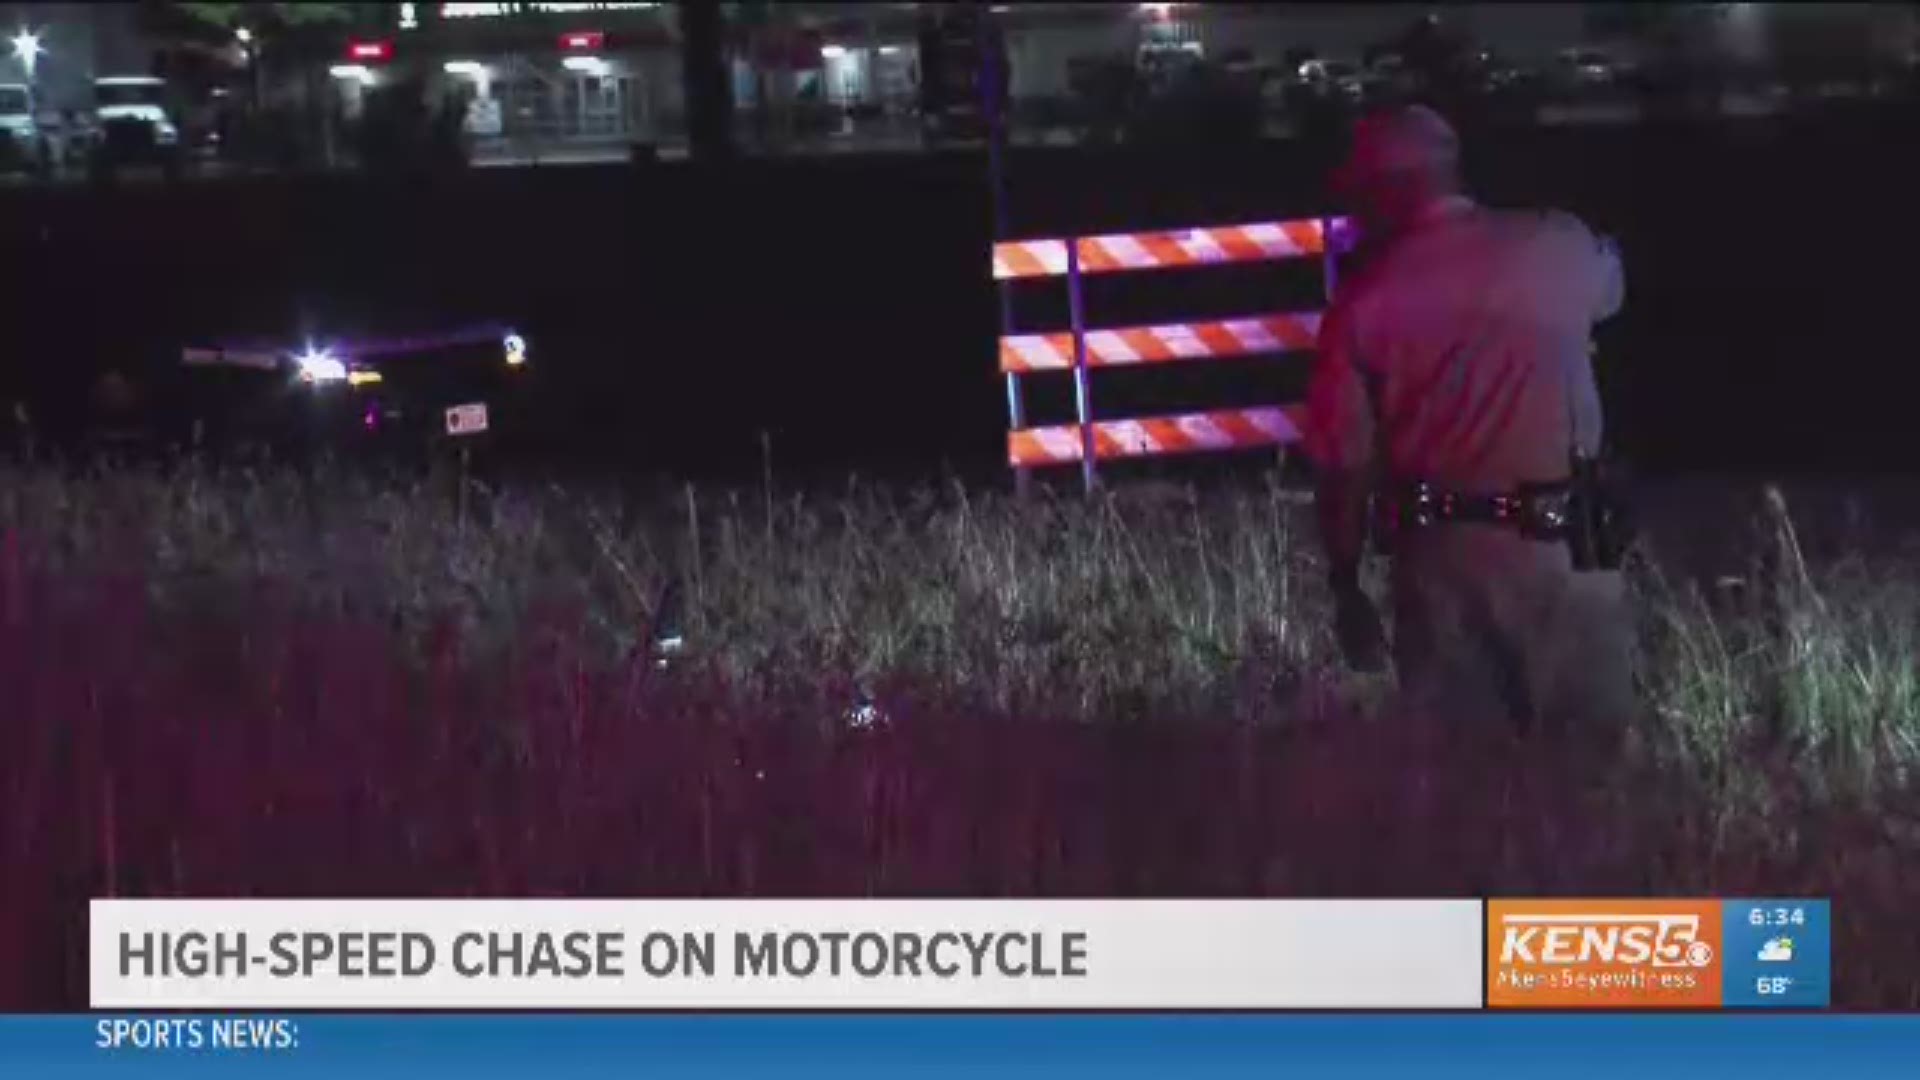 DPS troopers chased a couple on a motorcycle, ending with the man and woman both having injuries.